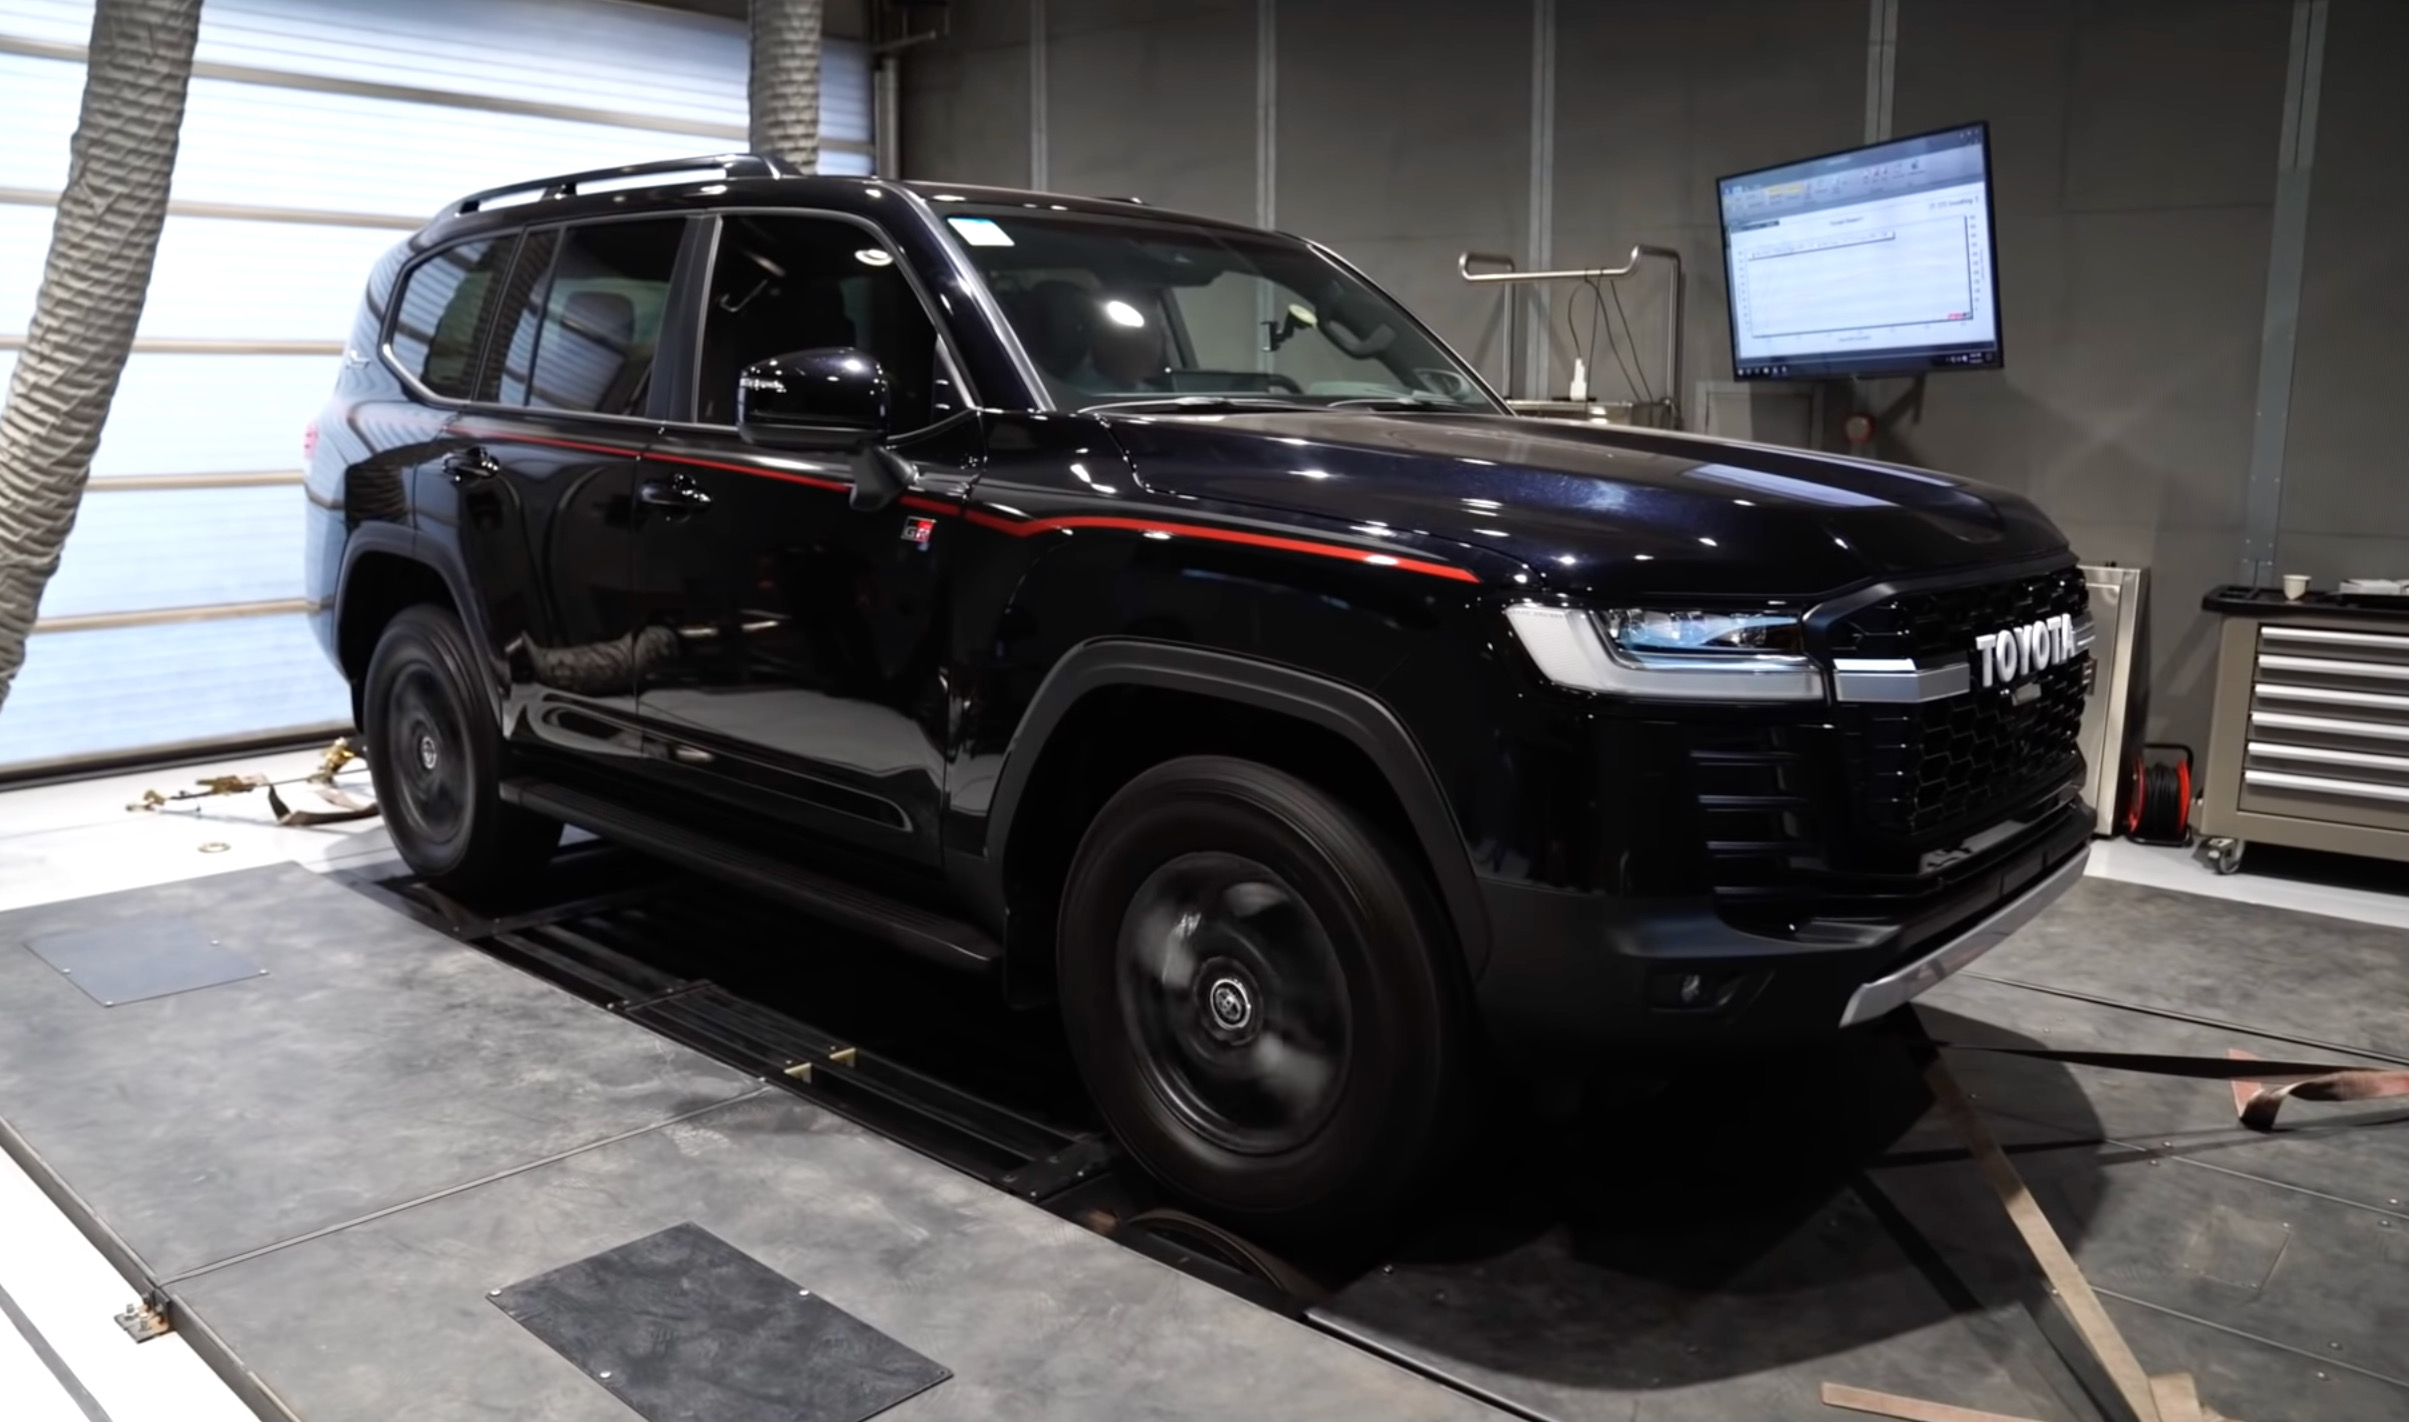 Stock Toyota LandCrusier 300 Series 3.3 diesel makes 202kW ATW on dyno (video)